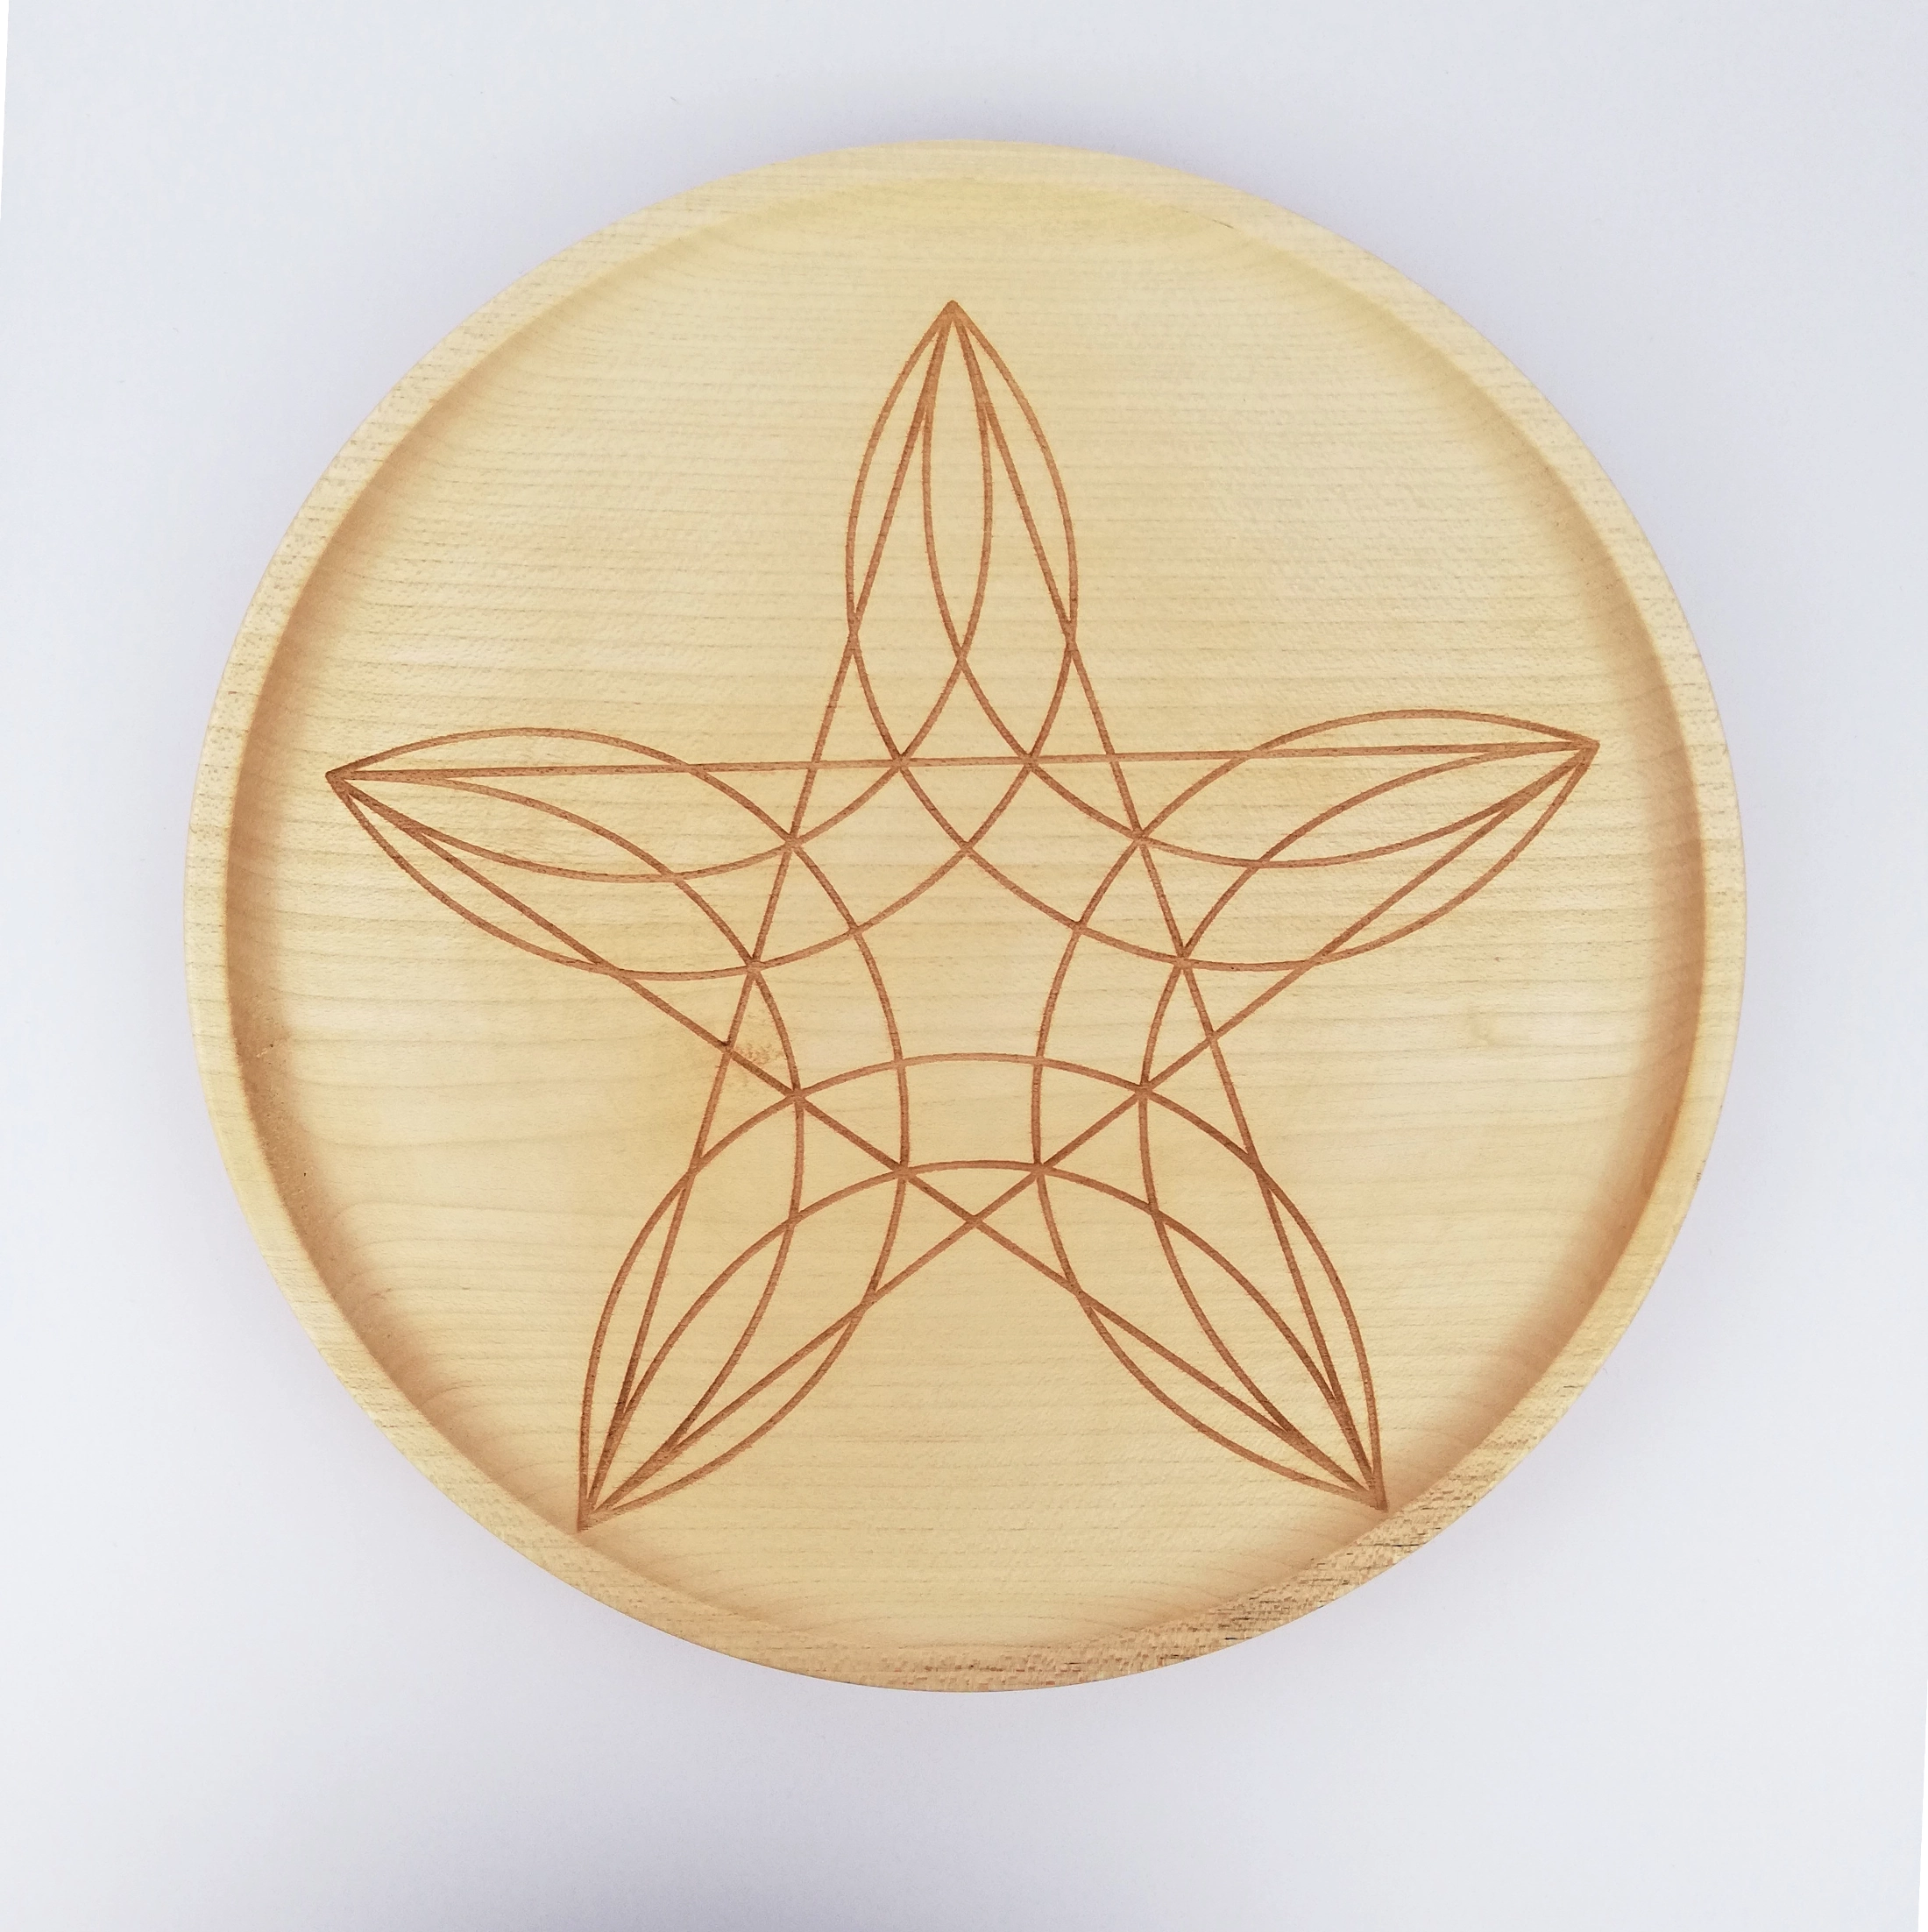 Pentagram on a middle plate (24cm/9.4in in diameter), front.